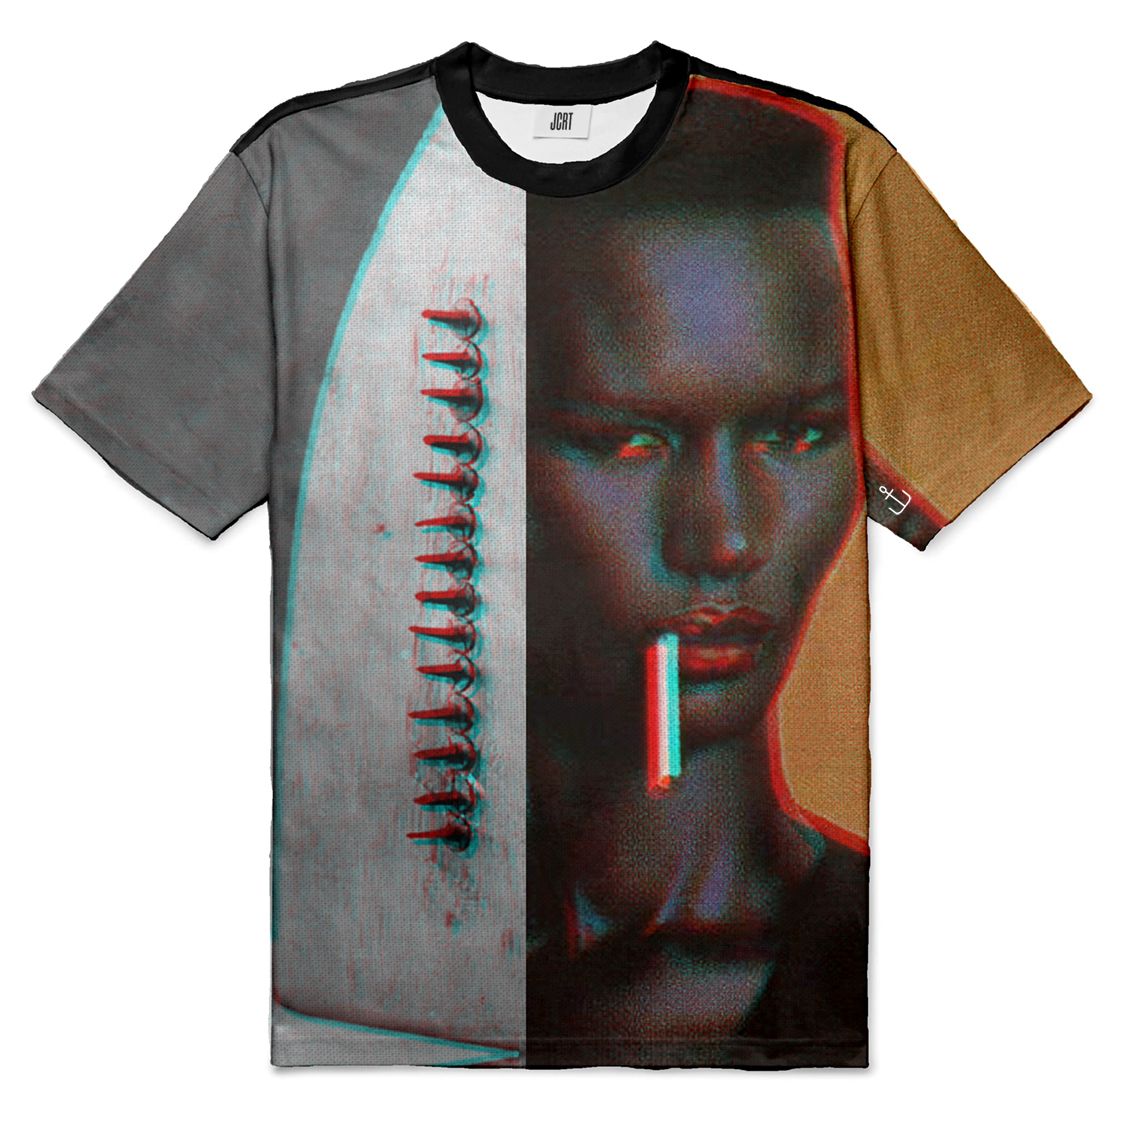 The Nightclubbing With Man Ray Exquisite Corpse T-Shirt